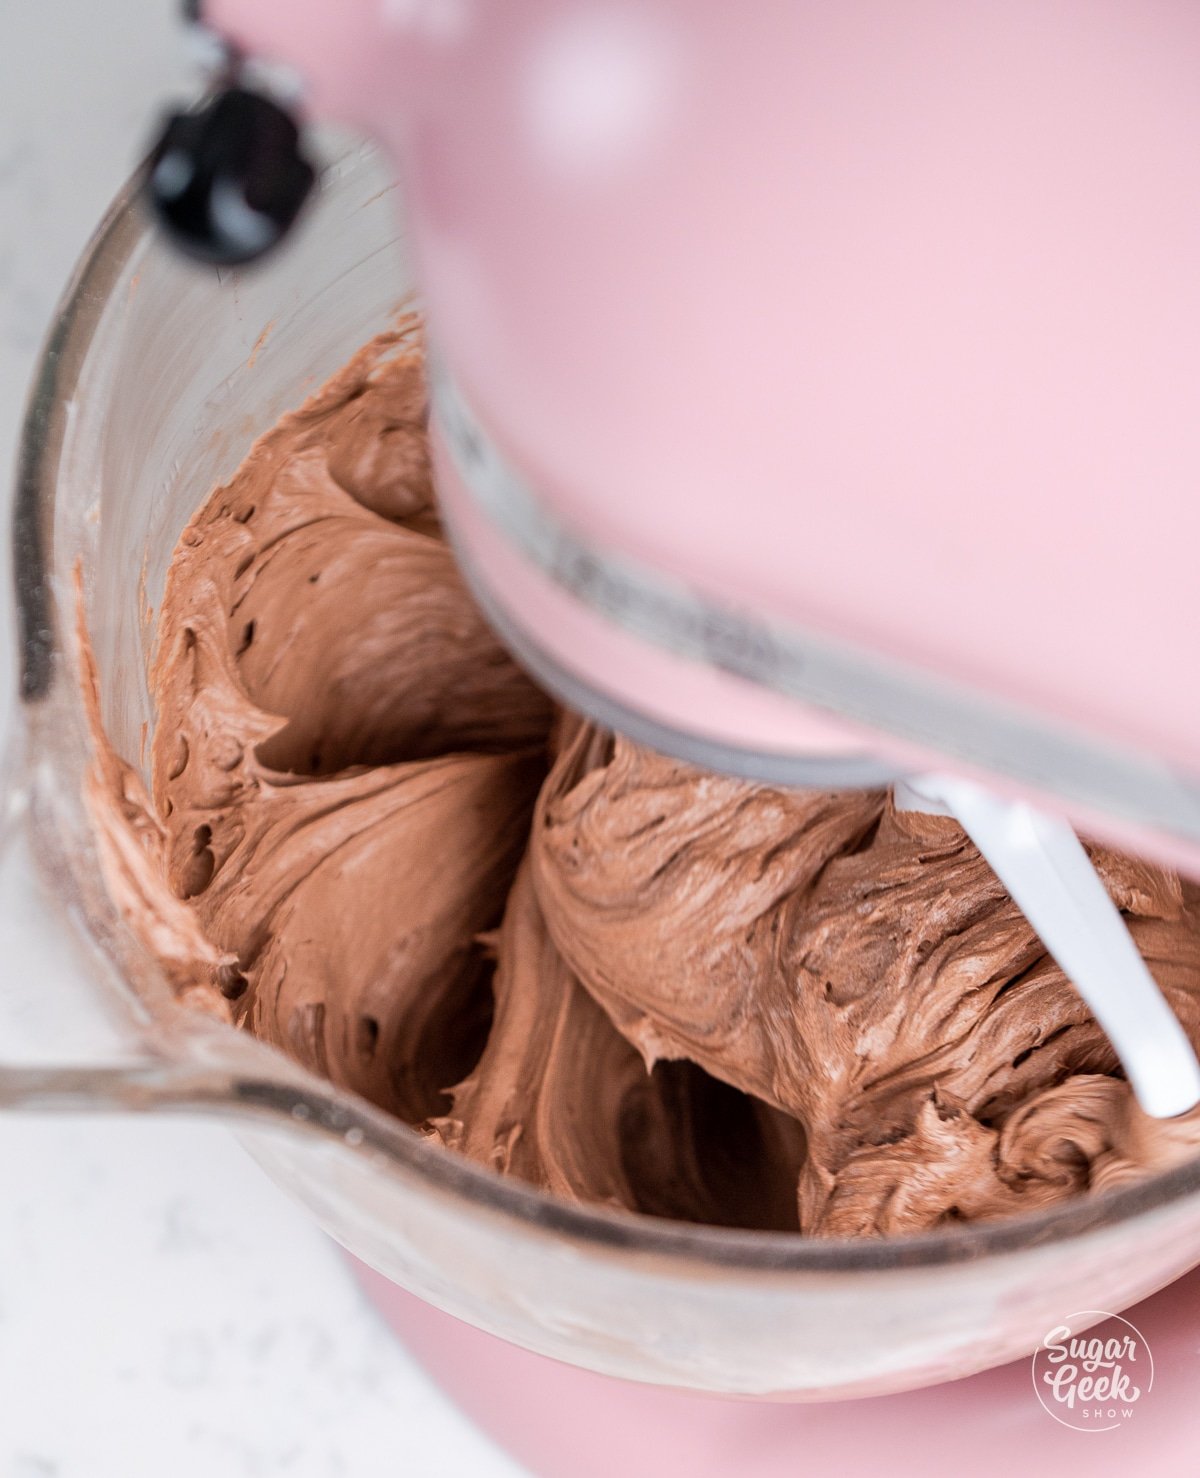 chocolate buttercream mixing in a stand mixer.